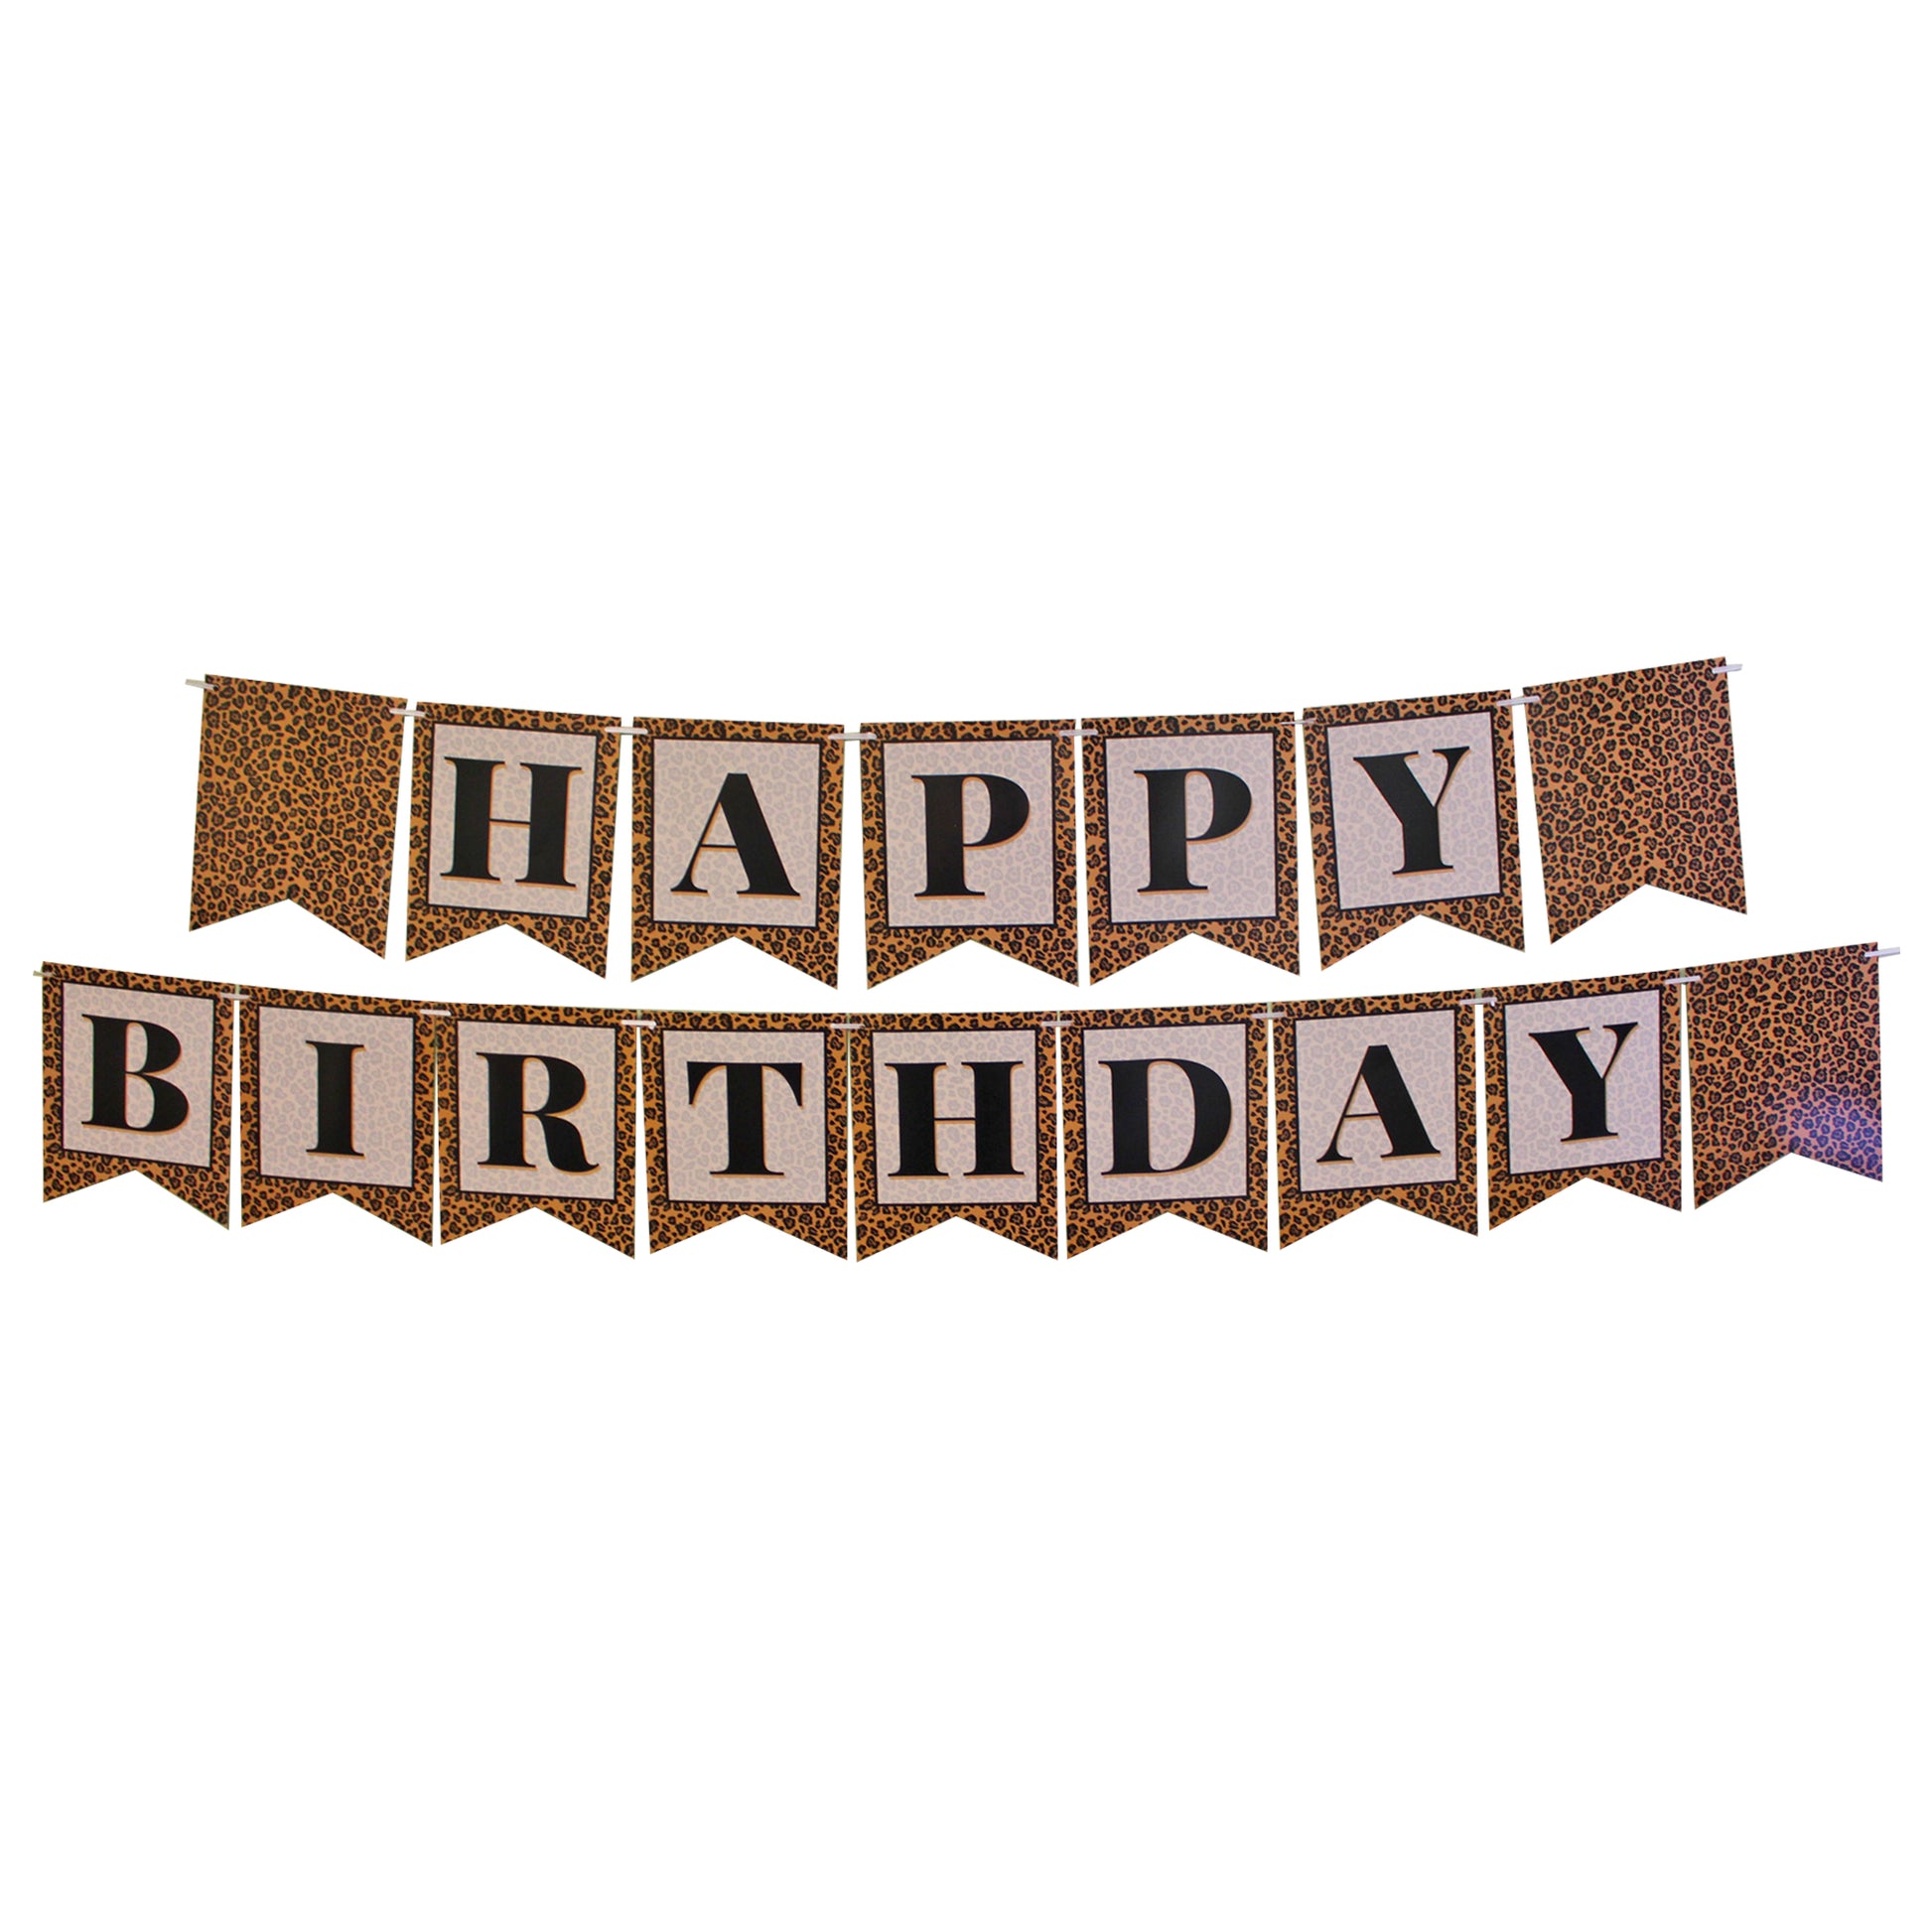 Leopard print Happy Birthday banner, a festive and fun decoration for any birthday celebration.